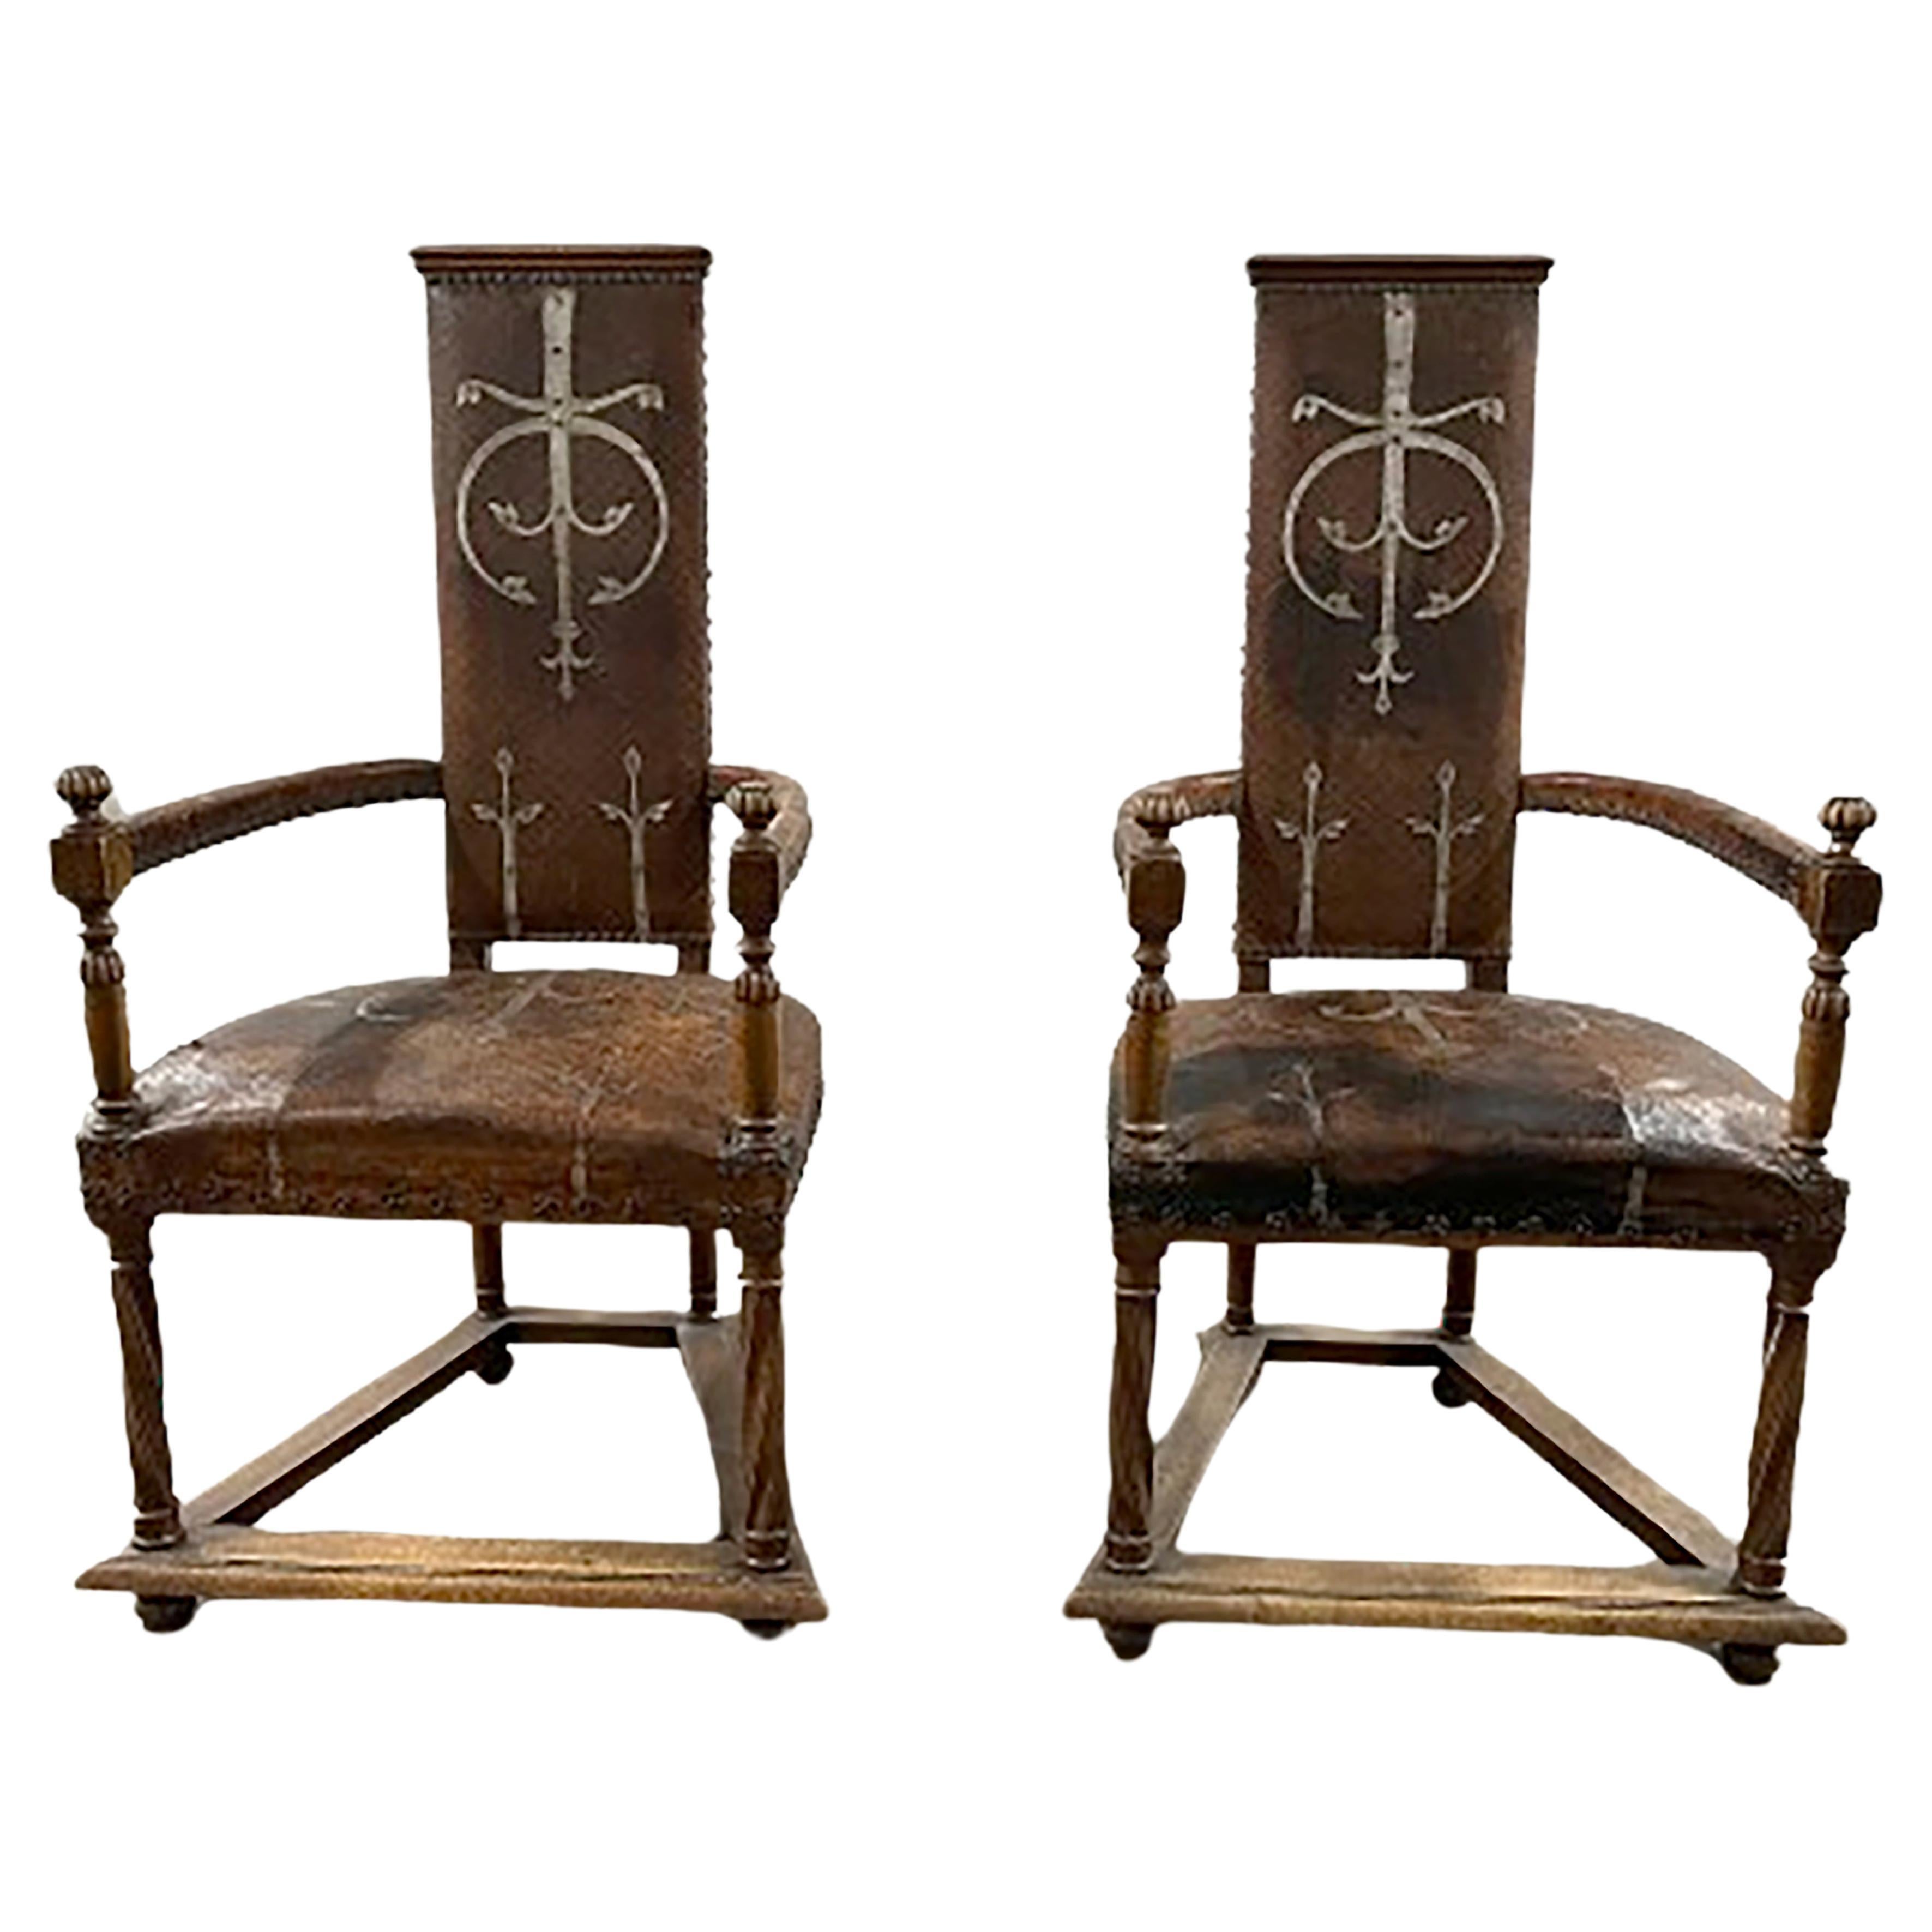 Pair of 19th Century Medieval Style Studded leather Spanish Armchairs